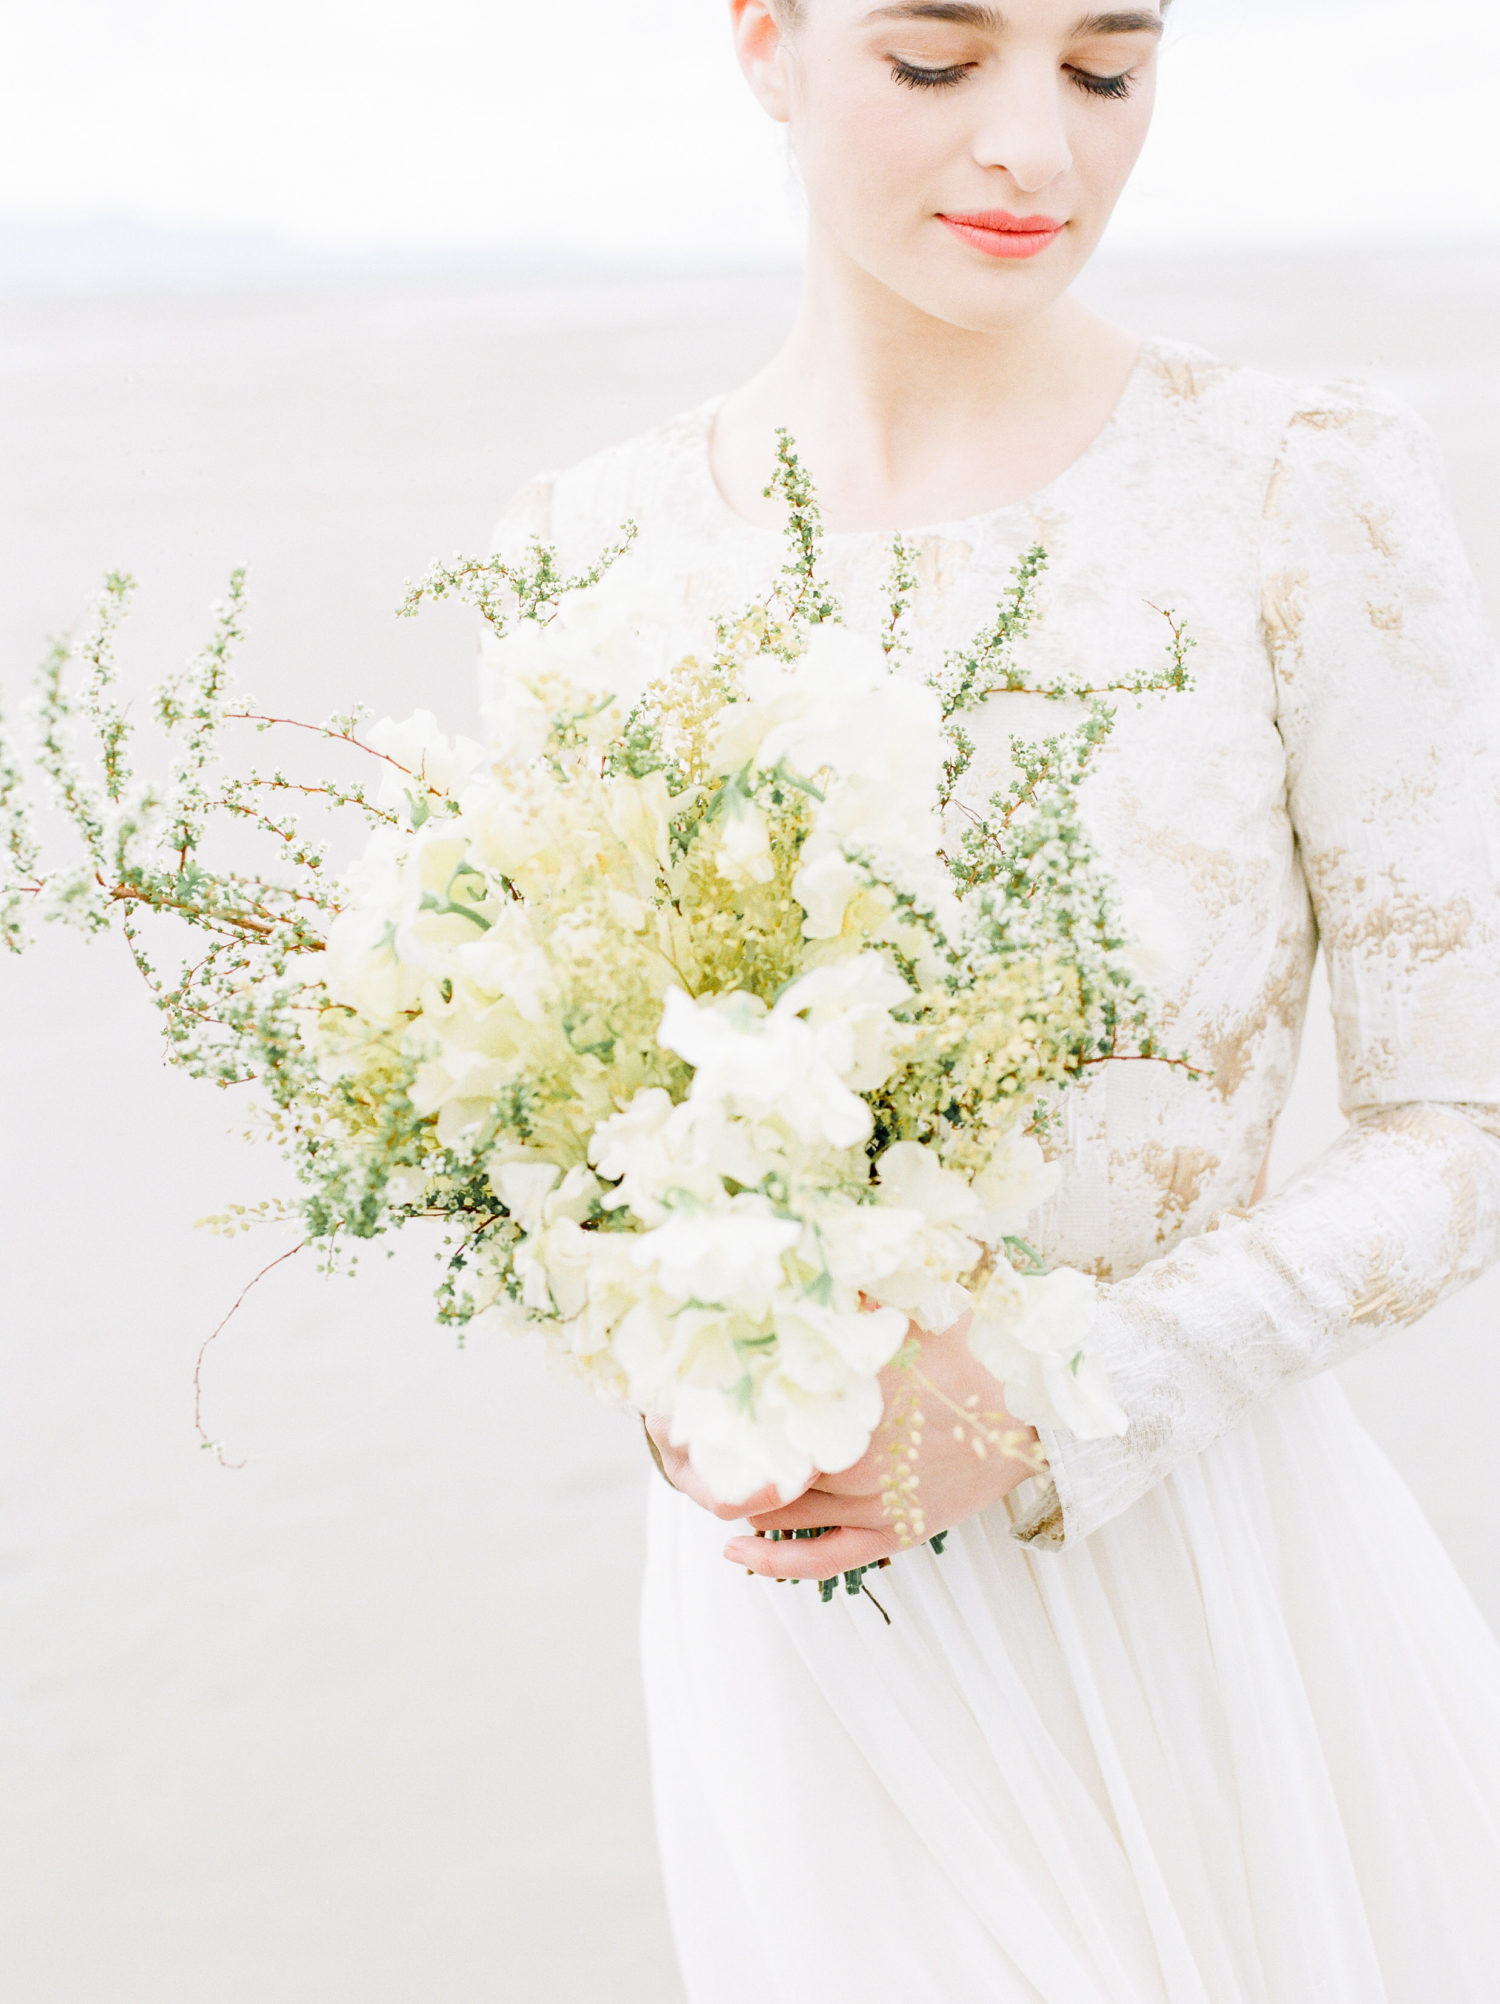 Run away with me... - Katina Patriquin | Fine Art Wedding and Portrait ...